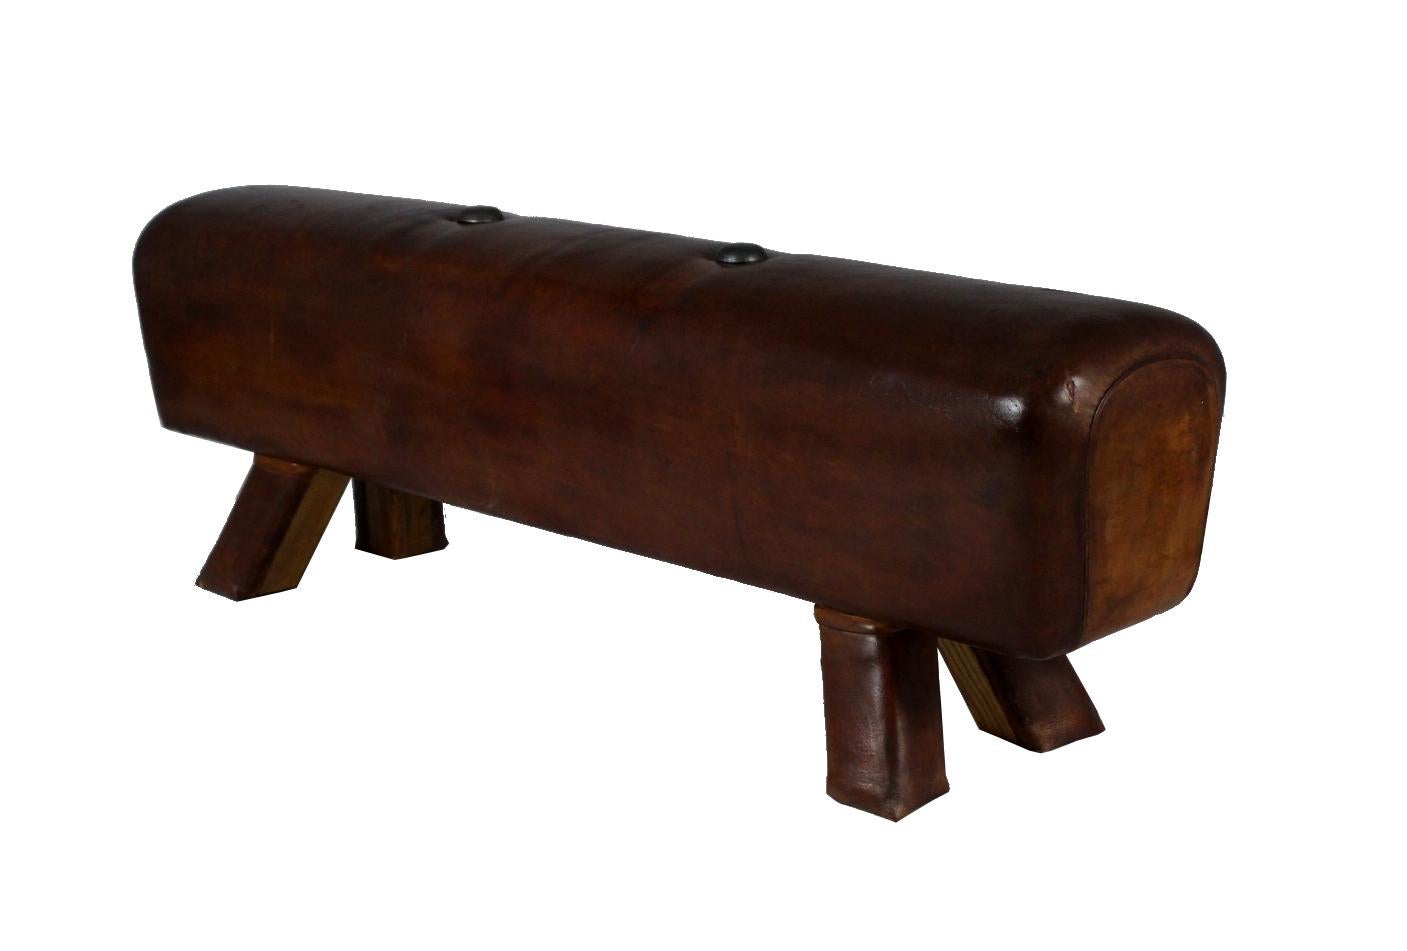 Leather gym pommel horse from the 1930s.